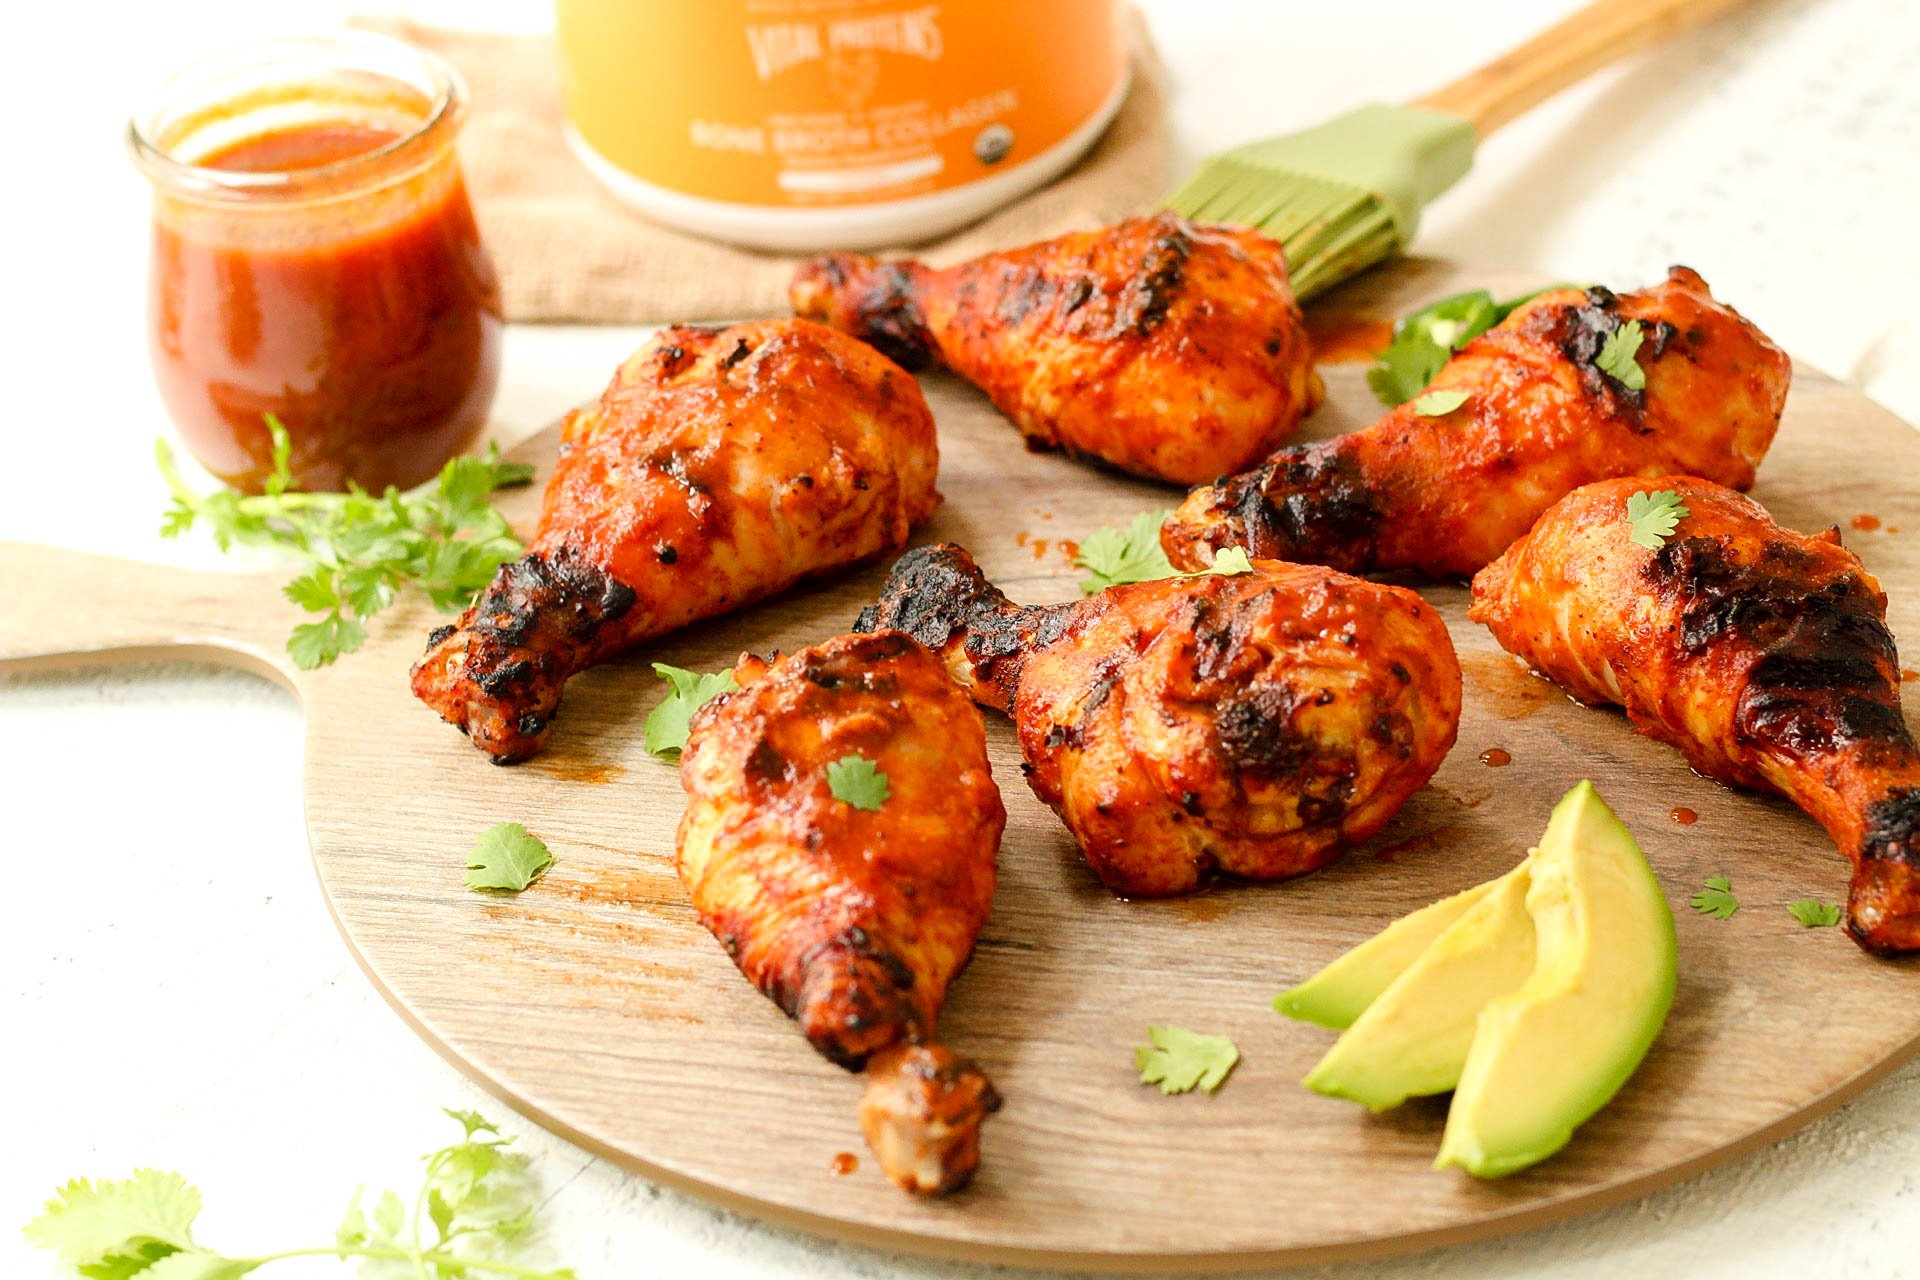 These fiesta Whole30 chicken drumsticks are marinaded in the best ever homemade Paleo and Whole30 taco sauce. The homemade taco sauce is only a few simple ingredients, and when you throw the chicken drumsticks on the grill, you have an easy dinner or protein for meal prep in under 30 minutes! Even if you want to use the oven baked method, these are the best tasting marinaded drumsticks! #whole30chickendrumsticks #homemadetacosauce #paleochickenrecipes #whole30tacosauce